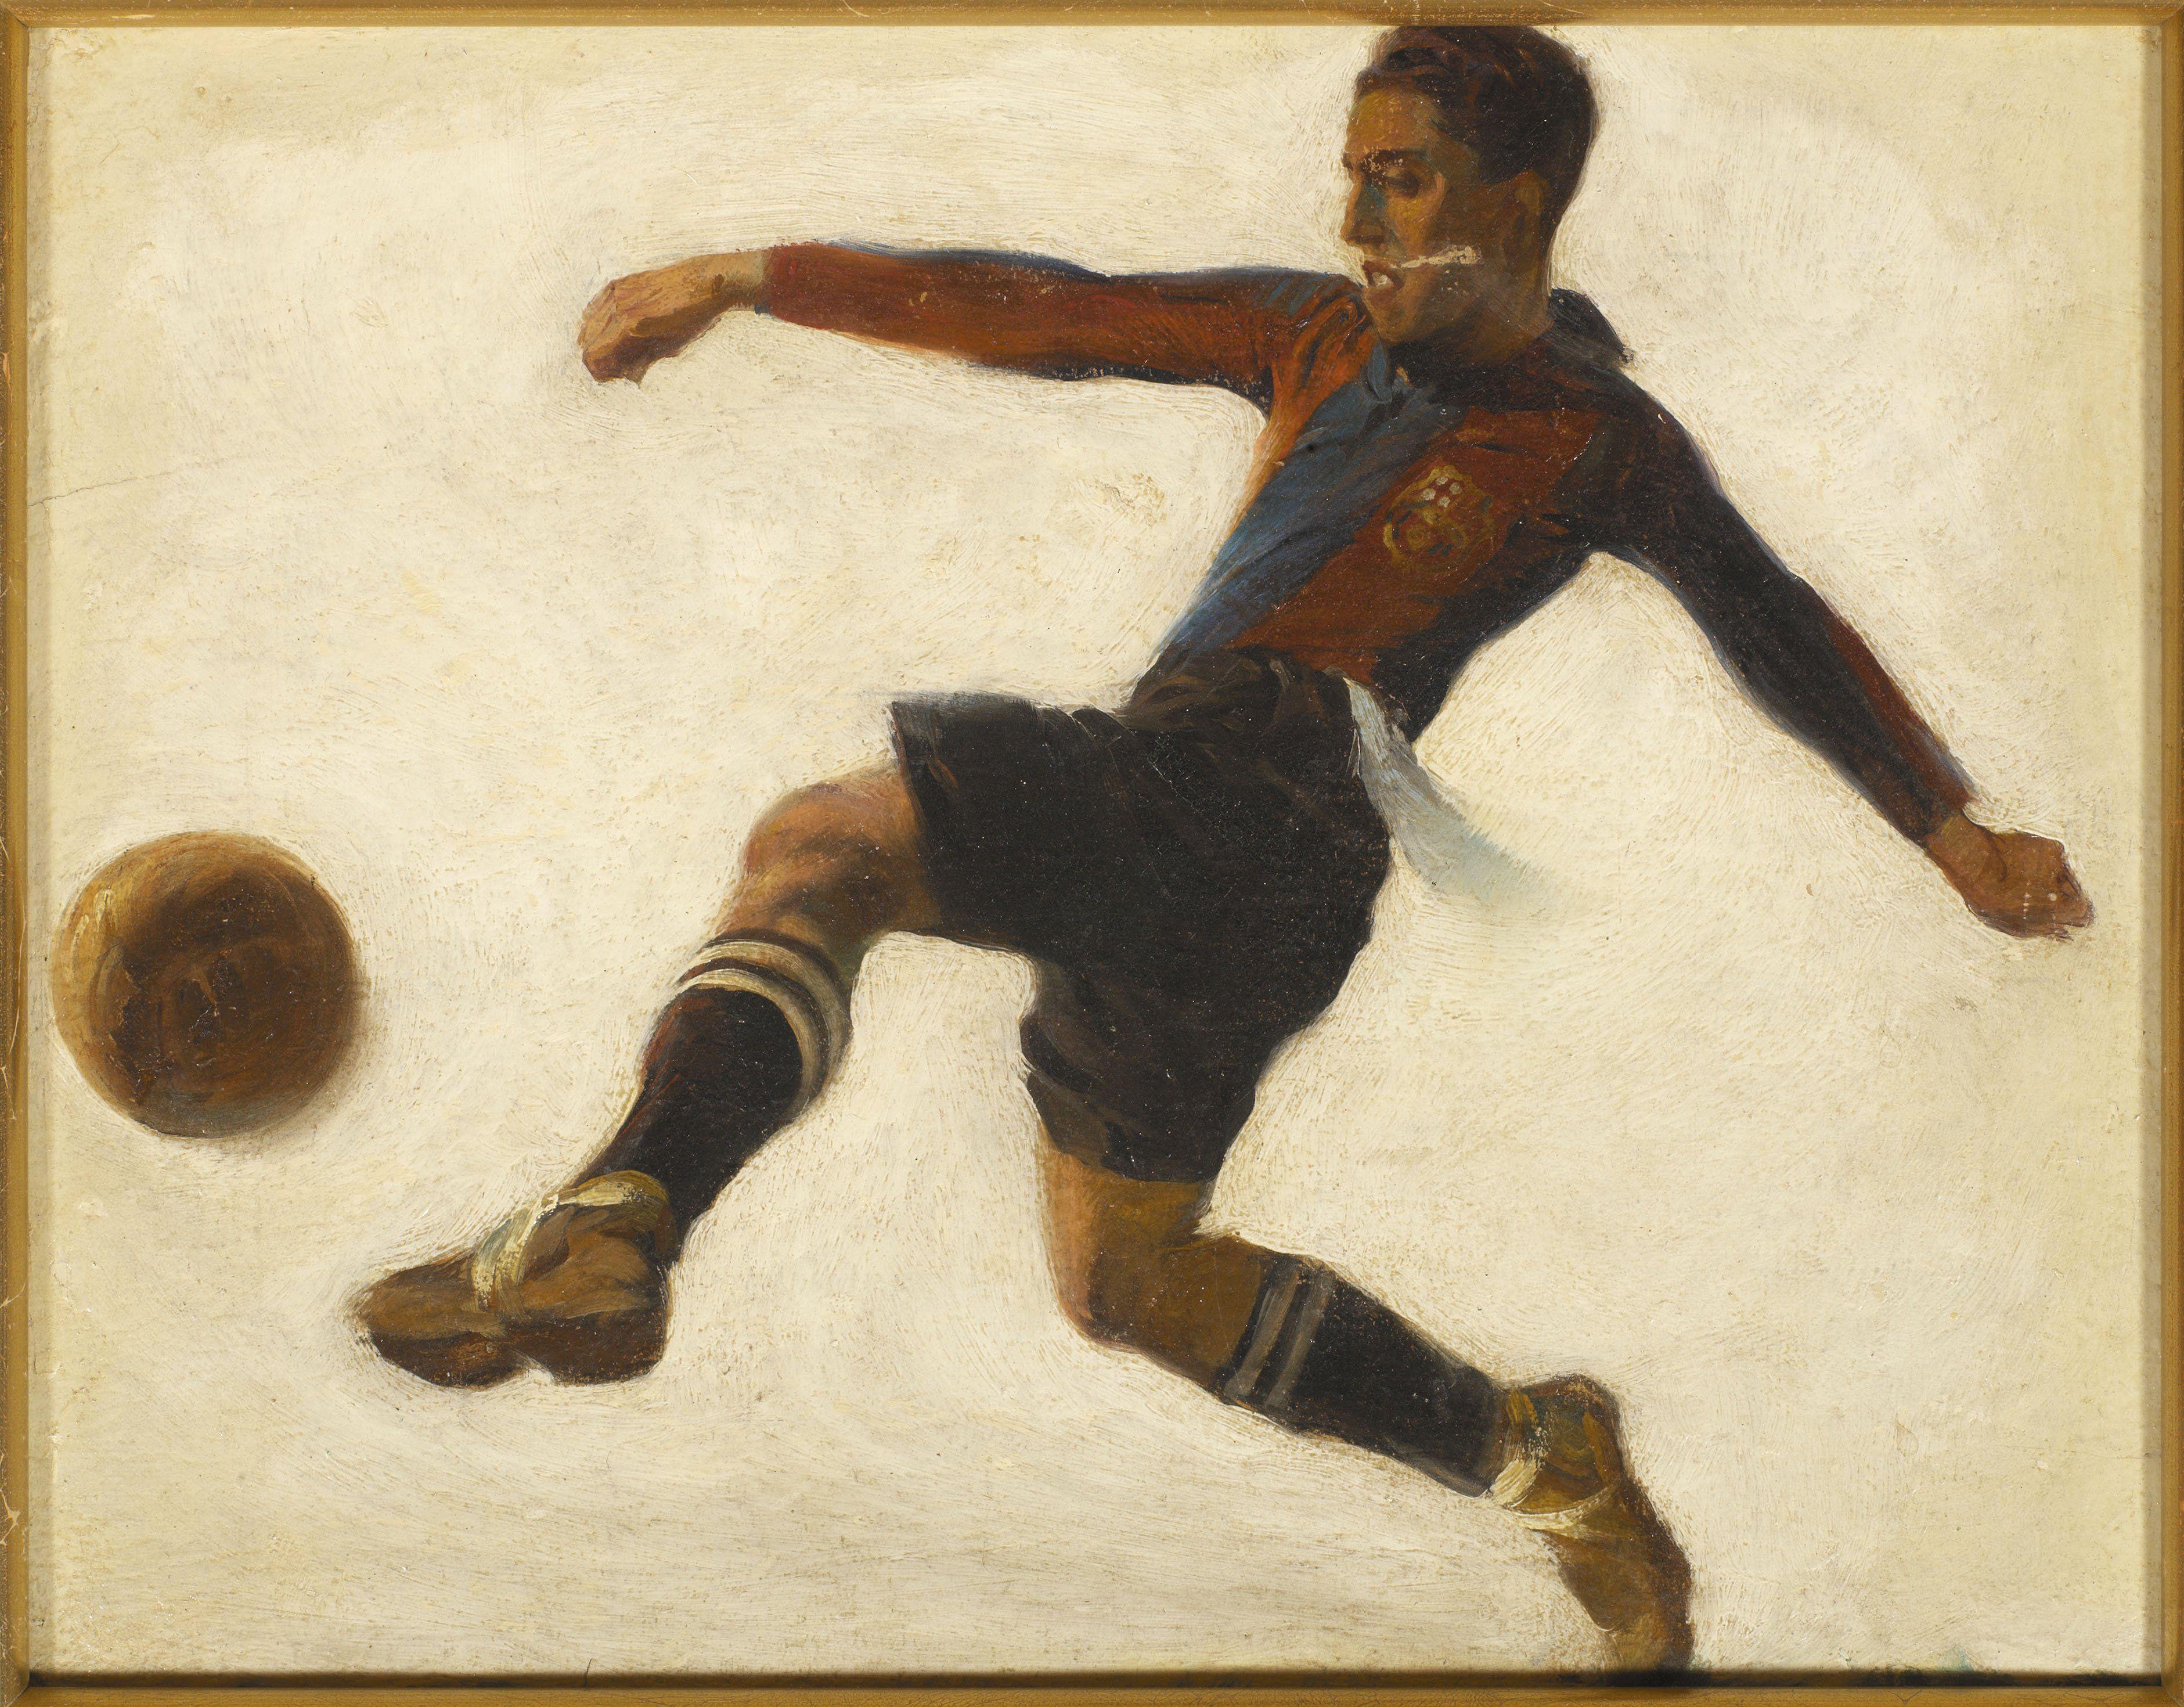 An image of Barcelona's legendary forward Paulino Alcantara, who played for the Catalan club between 1918 and 1927.